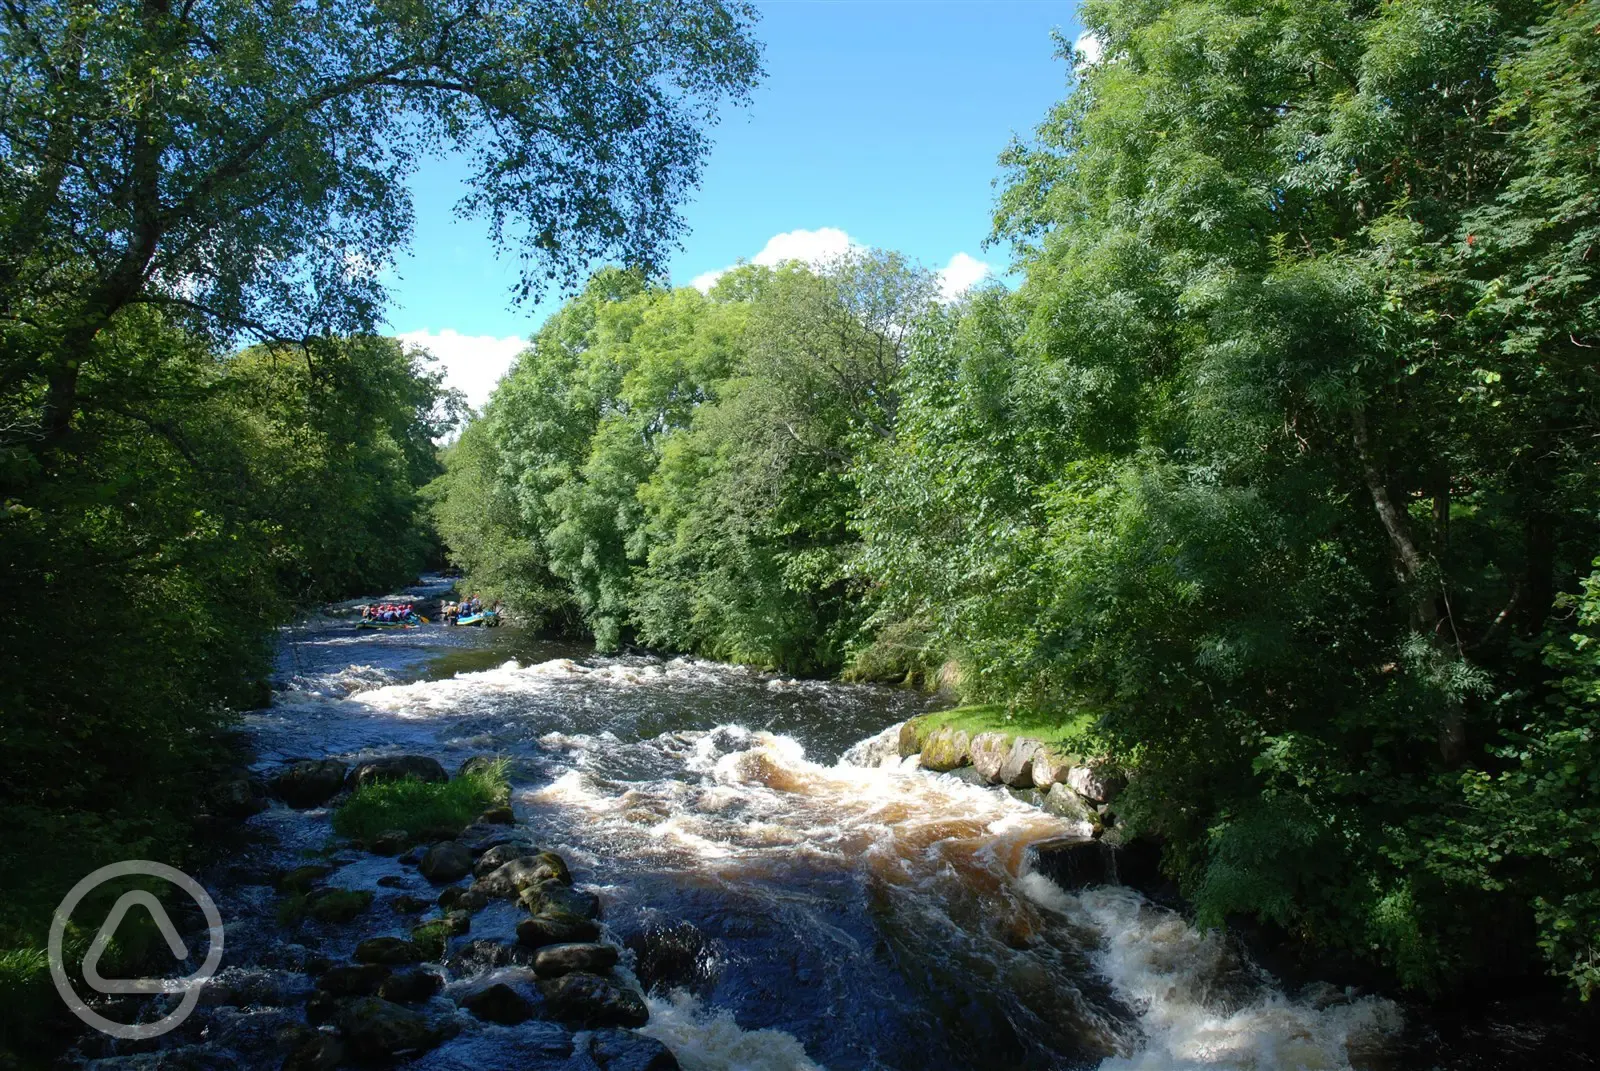 White water rafting on the River Tryweryn